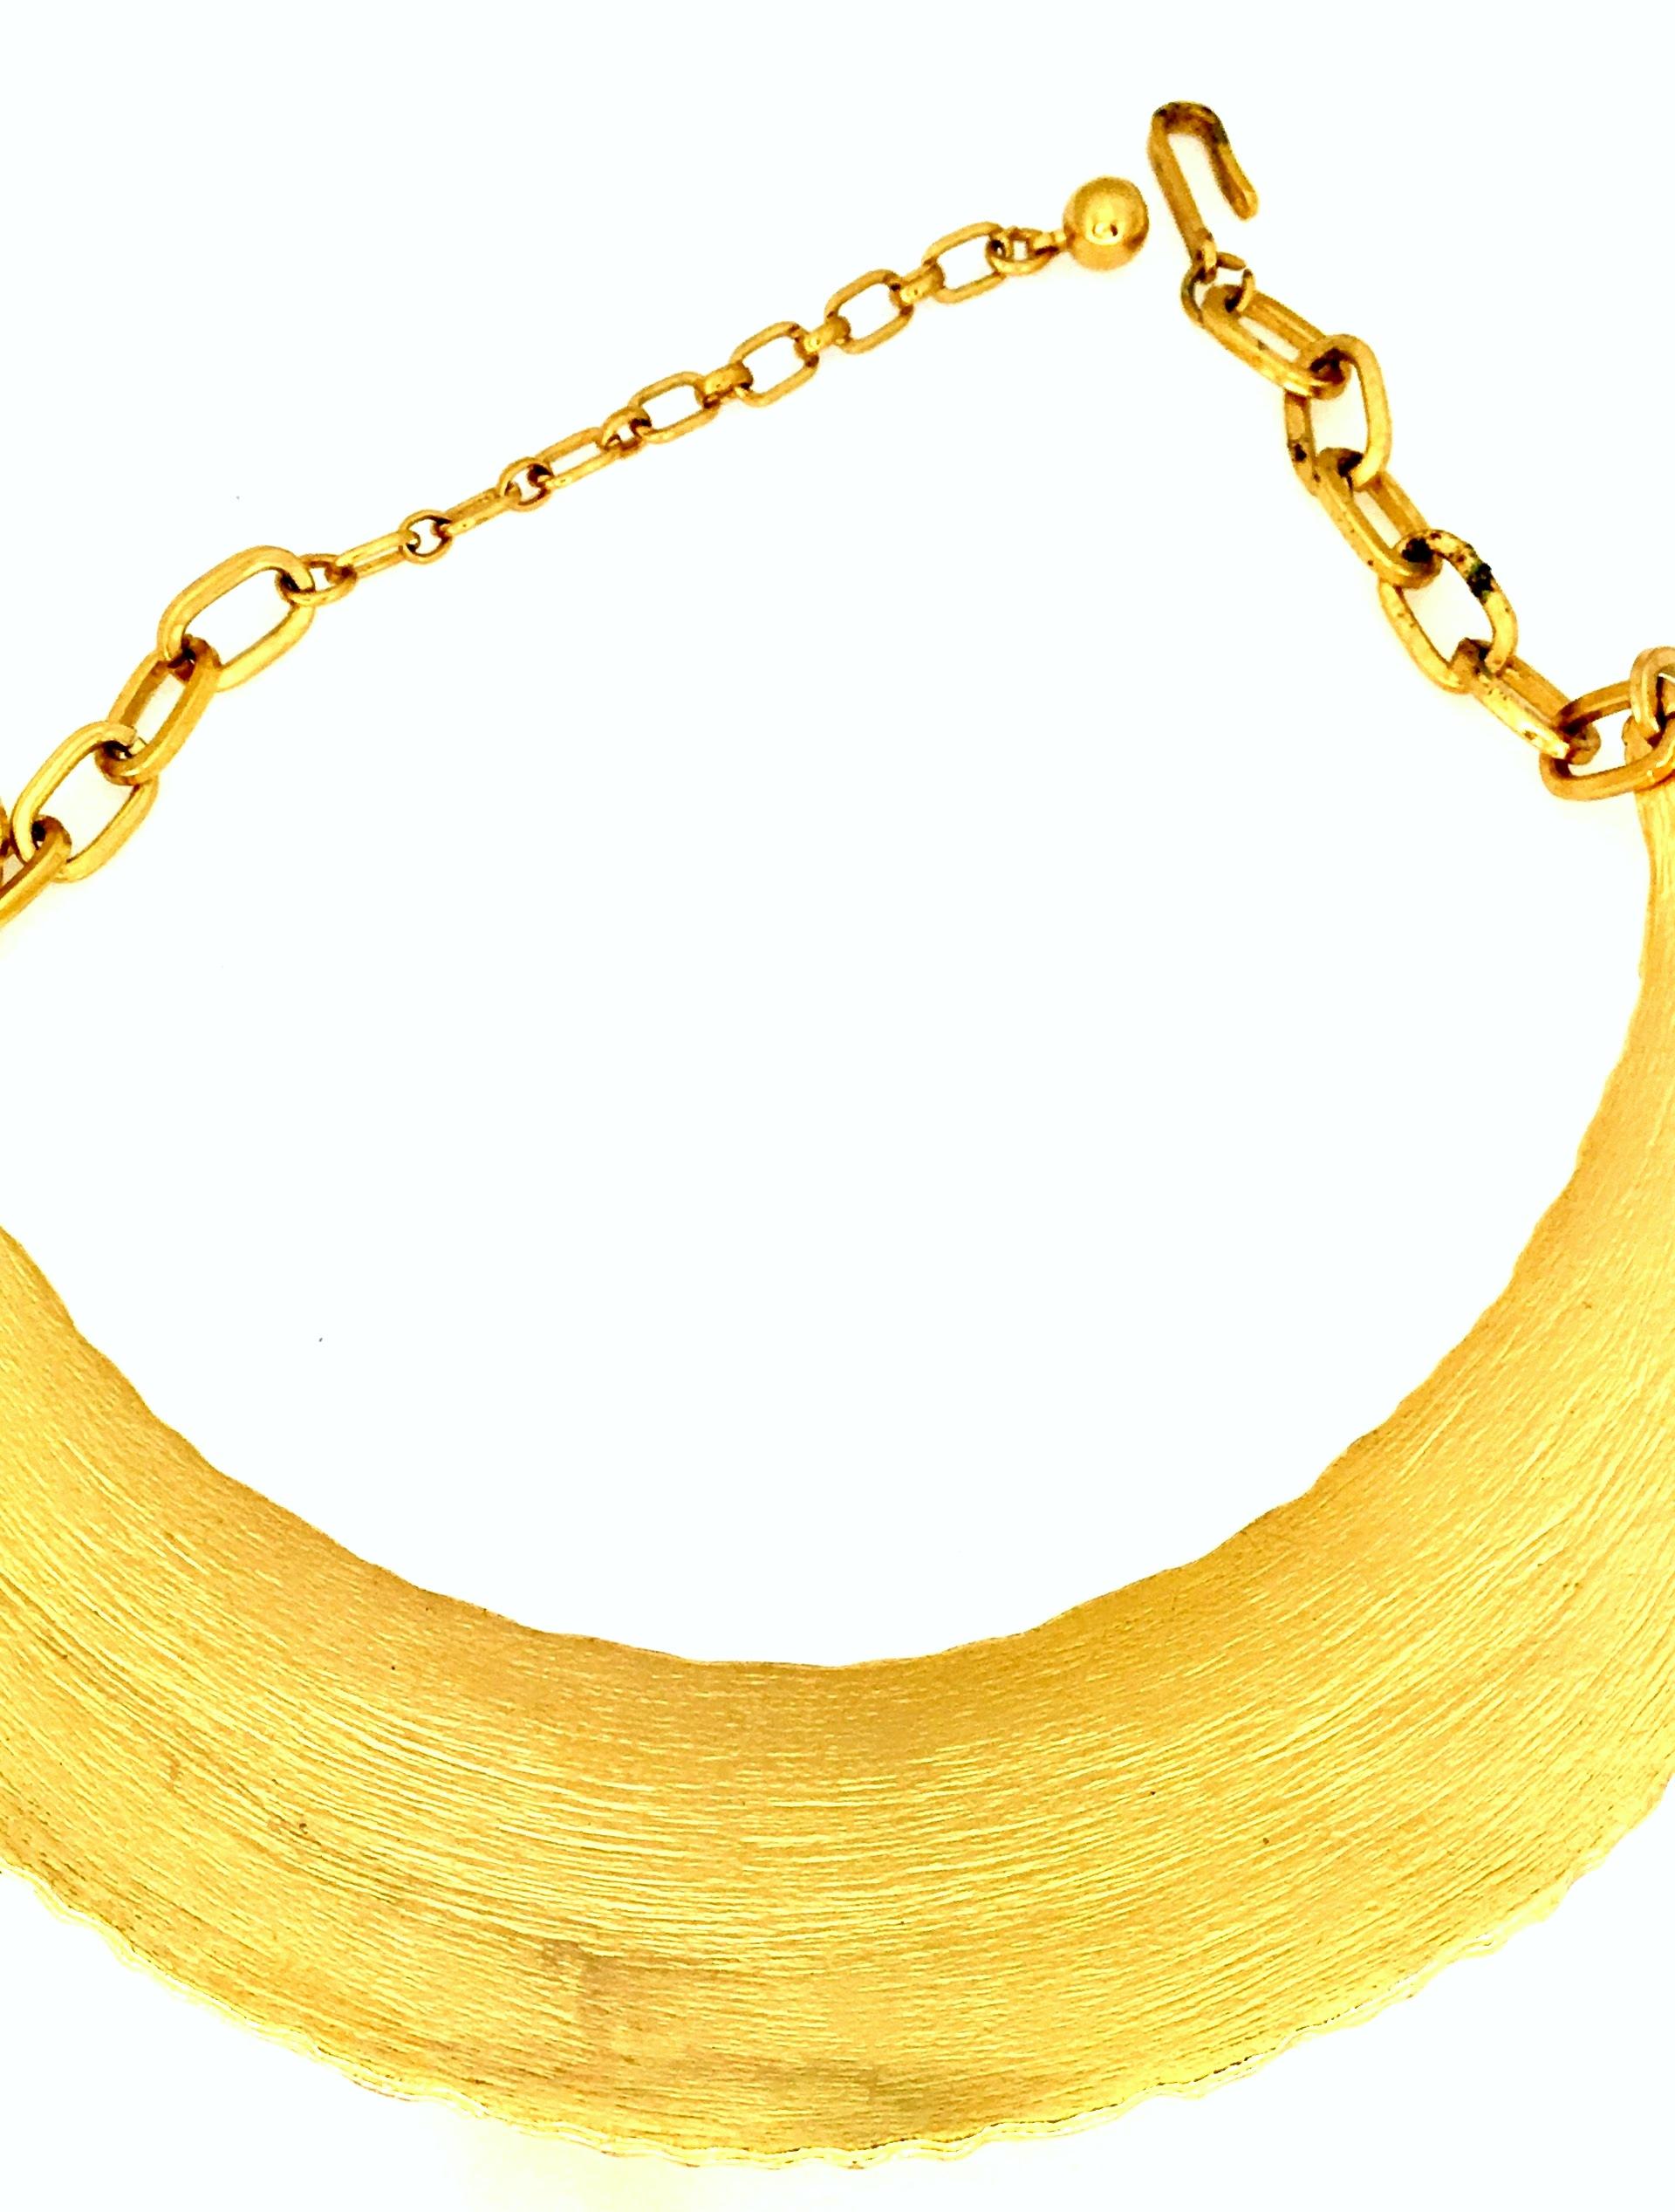 Women's or Men's 20th Century Modernist Gold Hammered Collar Choker Style Necklace By, Trifari For Sale